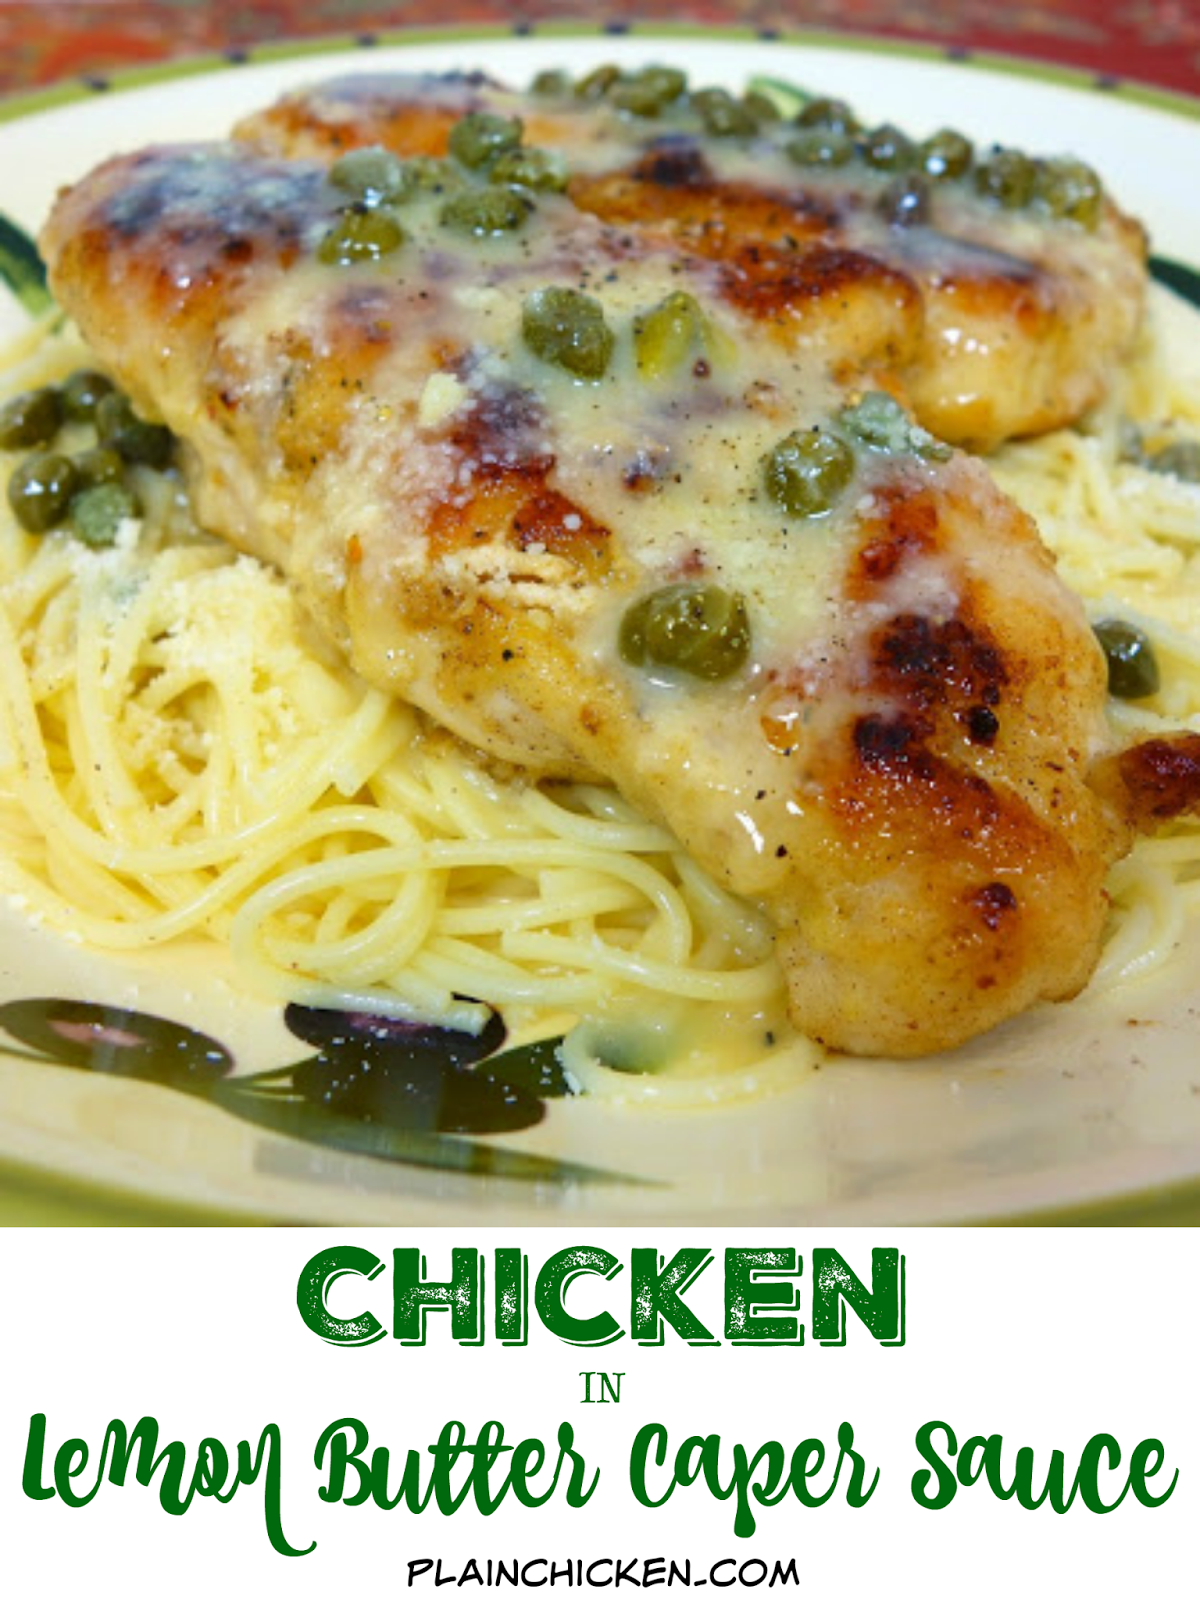 Chicken in Lemon Butter Caper Sauce - restaurant quality! You'll be blown away after one bite! Sautéed chicken, pasta and a quick homemade lemon butter caper sauce. Ready in 15 minutes!